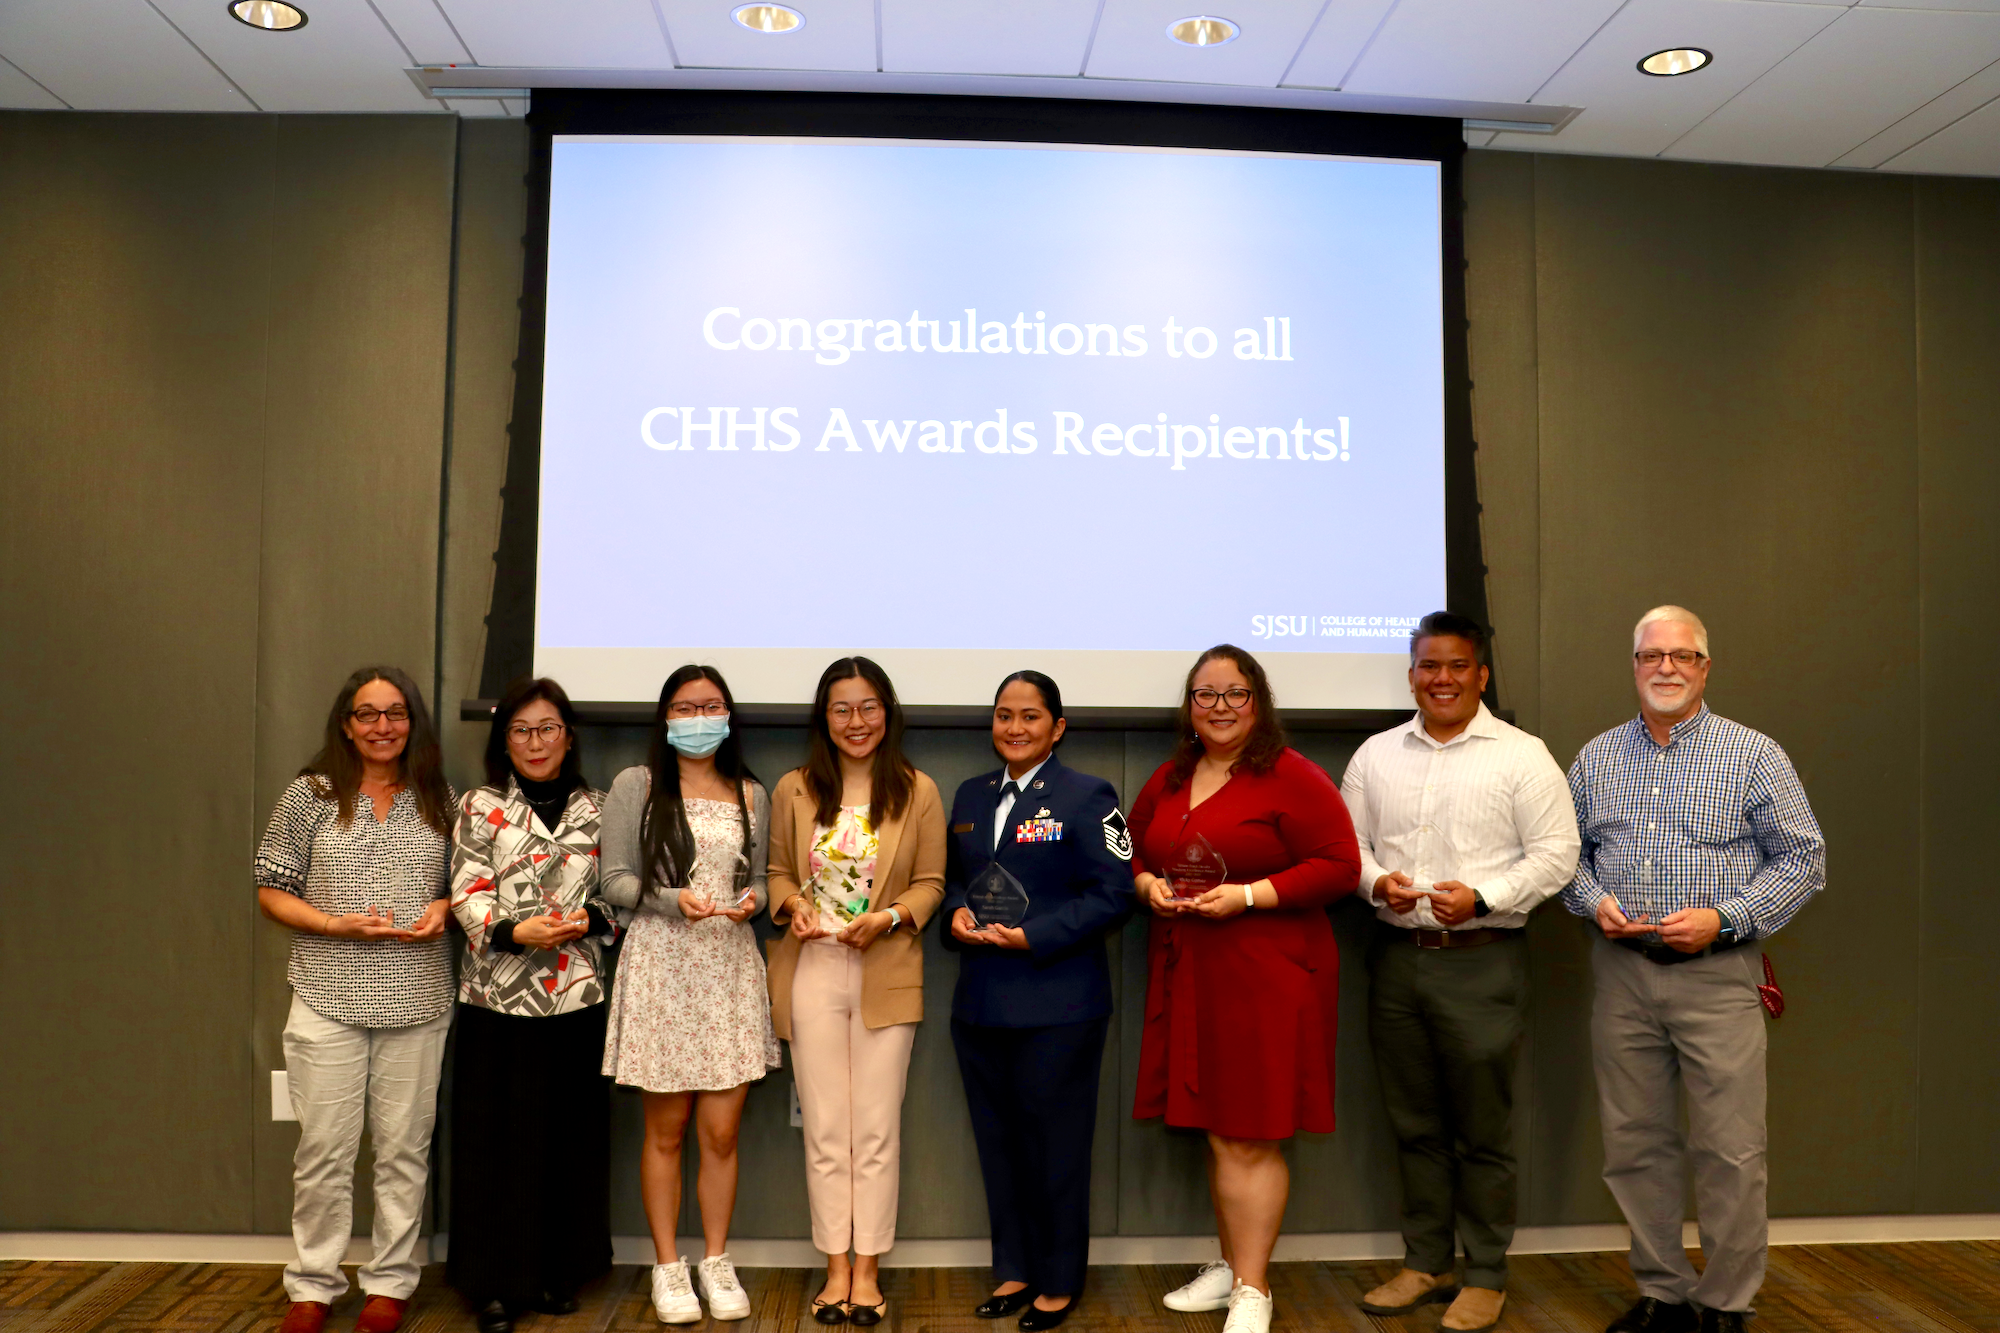 CHHS Awards Recipients